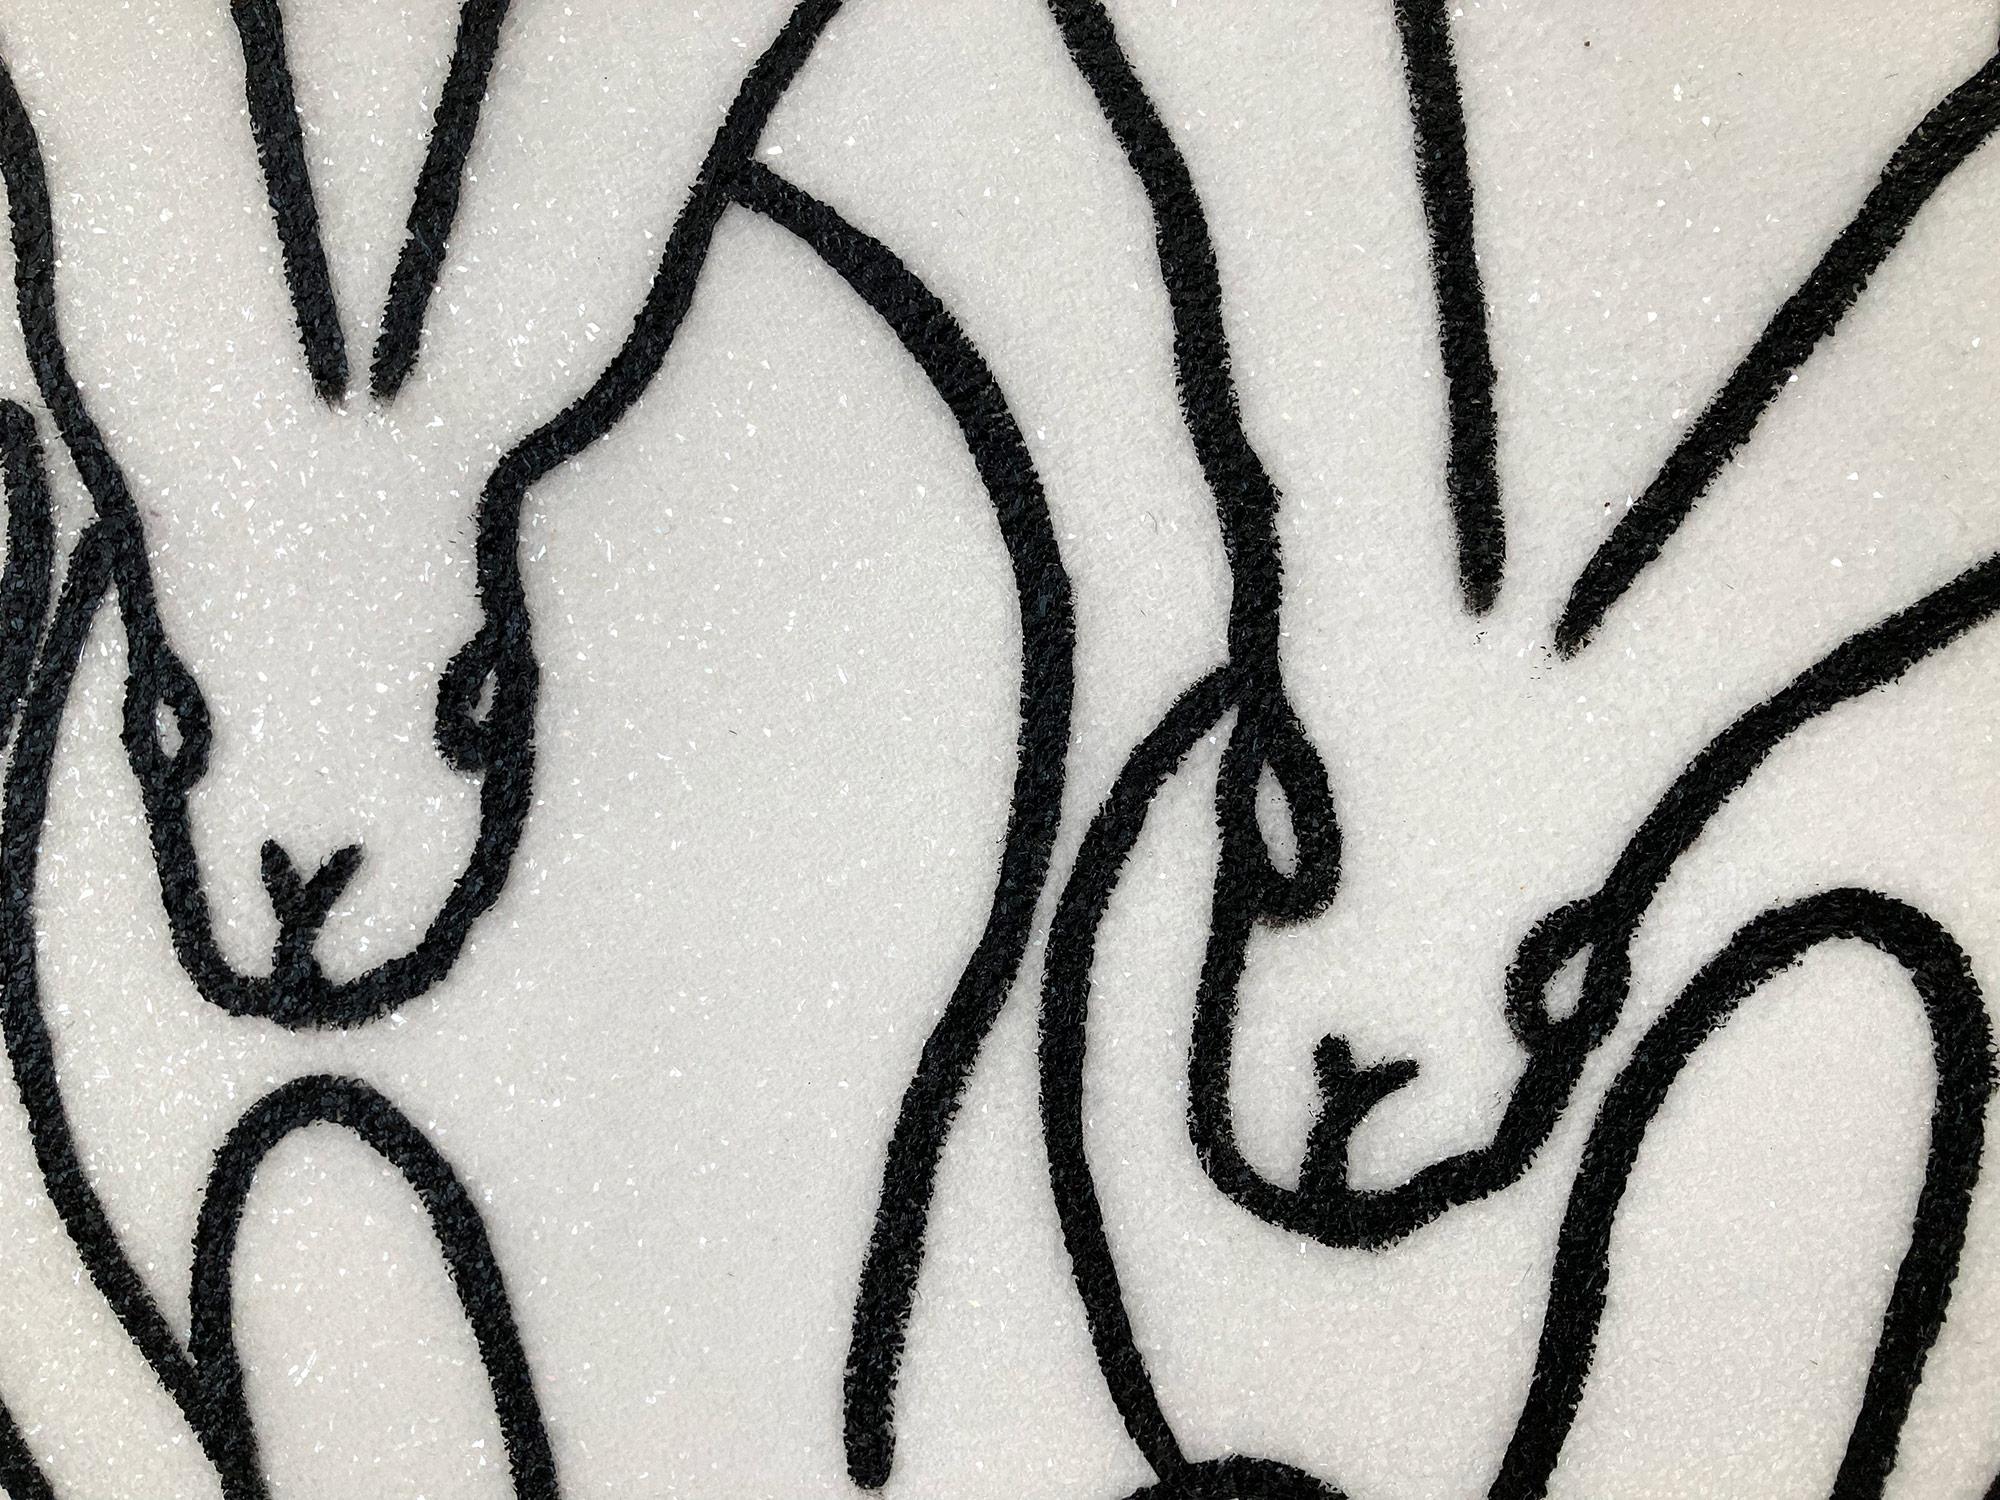 A wonderful composition of one of Slonem's most iconic subjects, Bunnies. This piece depicts gestural figures of Bunnies against a white background with Diamond Dust. The color white symbolizes safety, purity, and cleanliness. This magnificent color